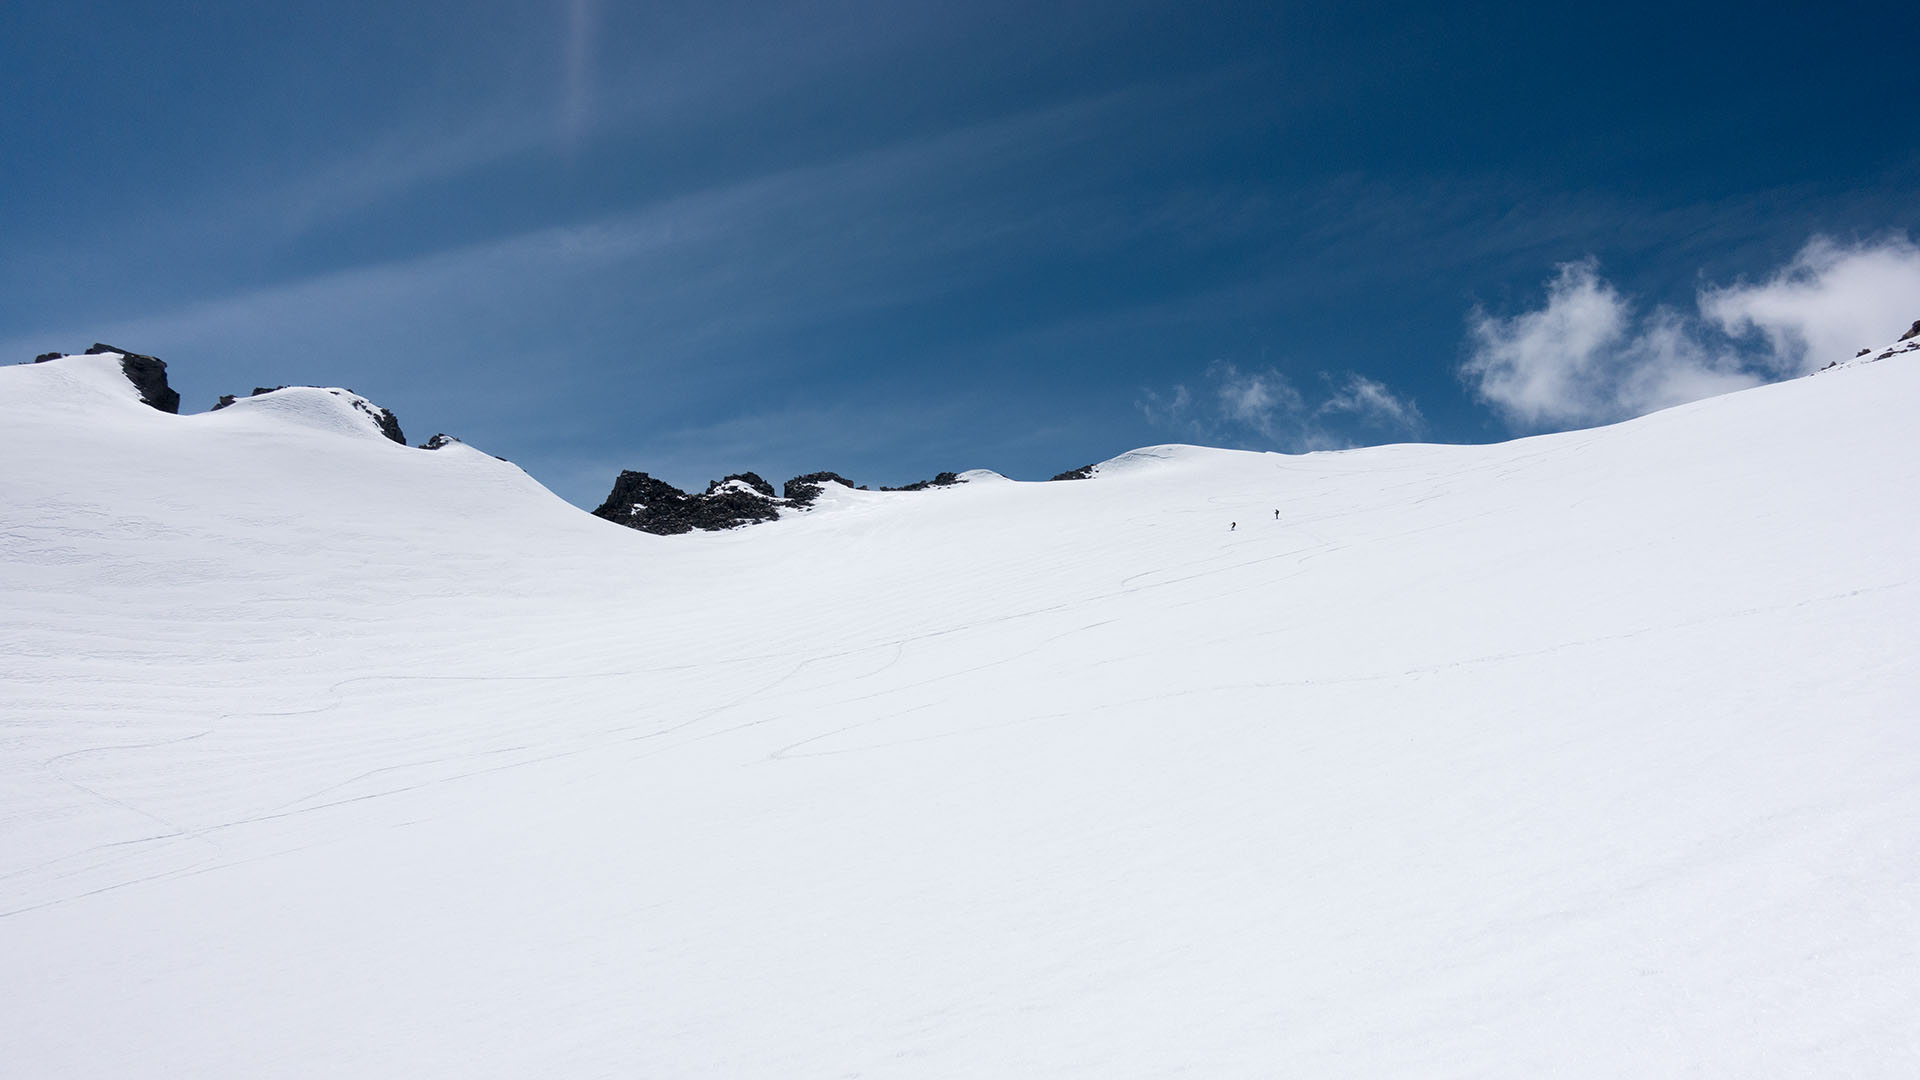 The Thumb: skiing the summit snowfield